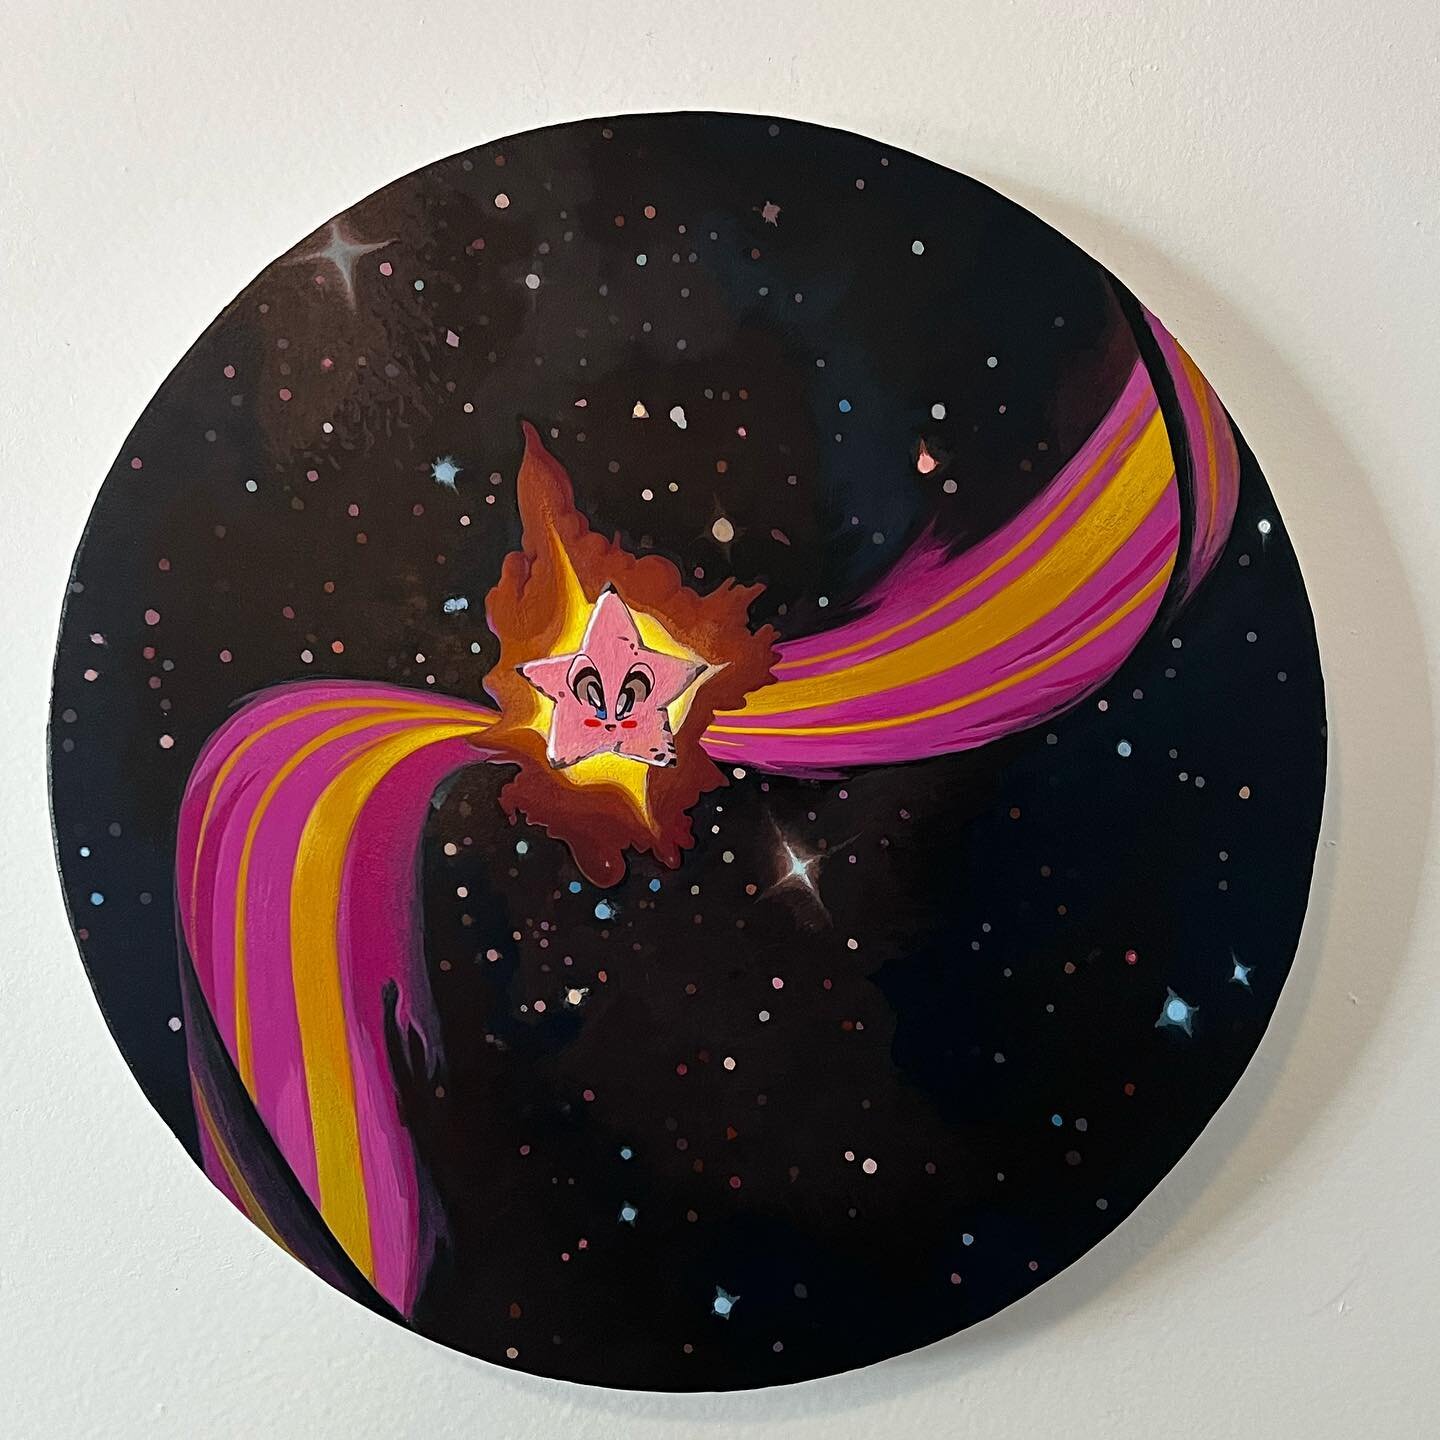 Just finished a new Star painting. This is one of a series I&rsquo;ve been working on.  #newpainting